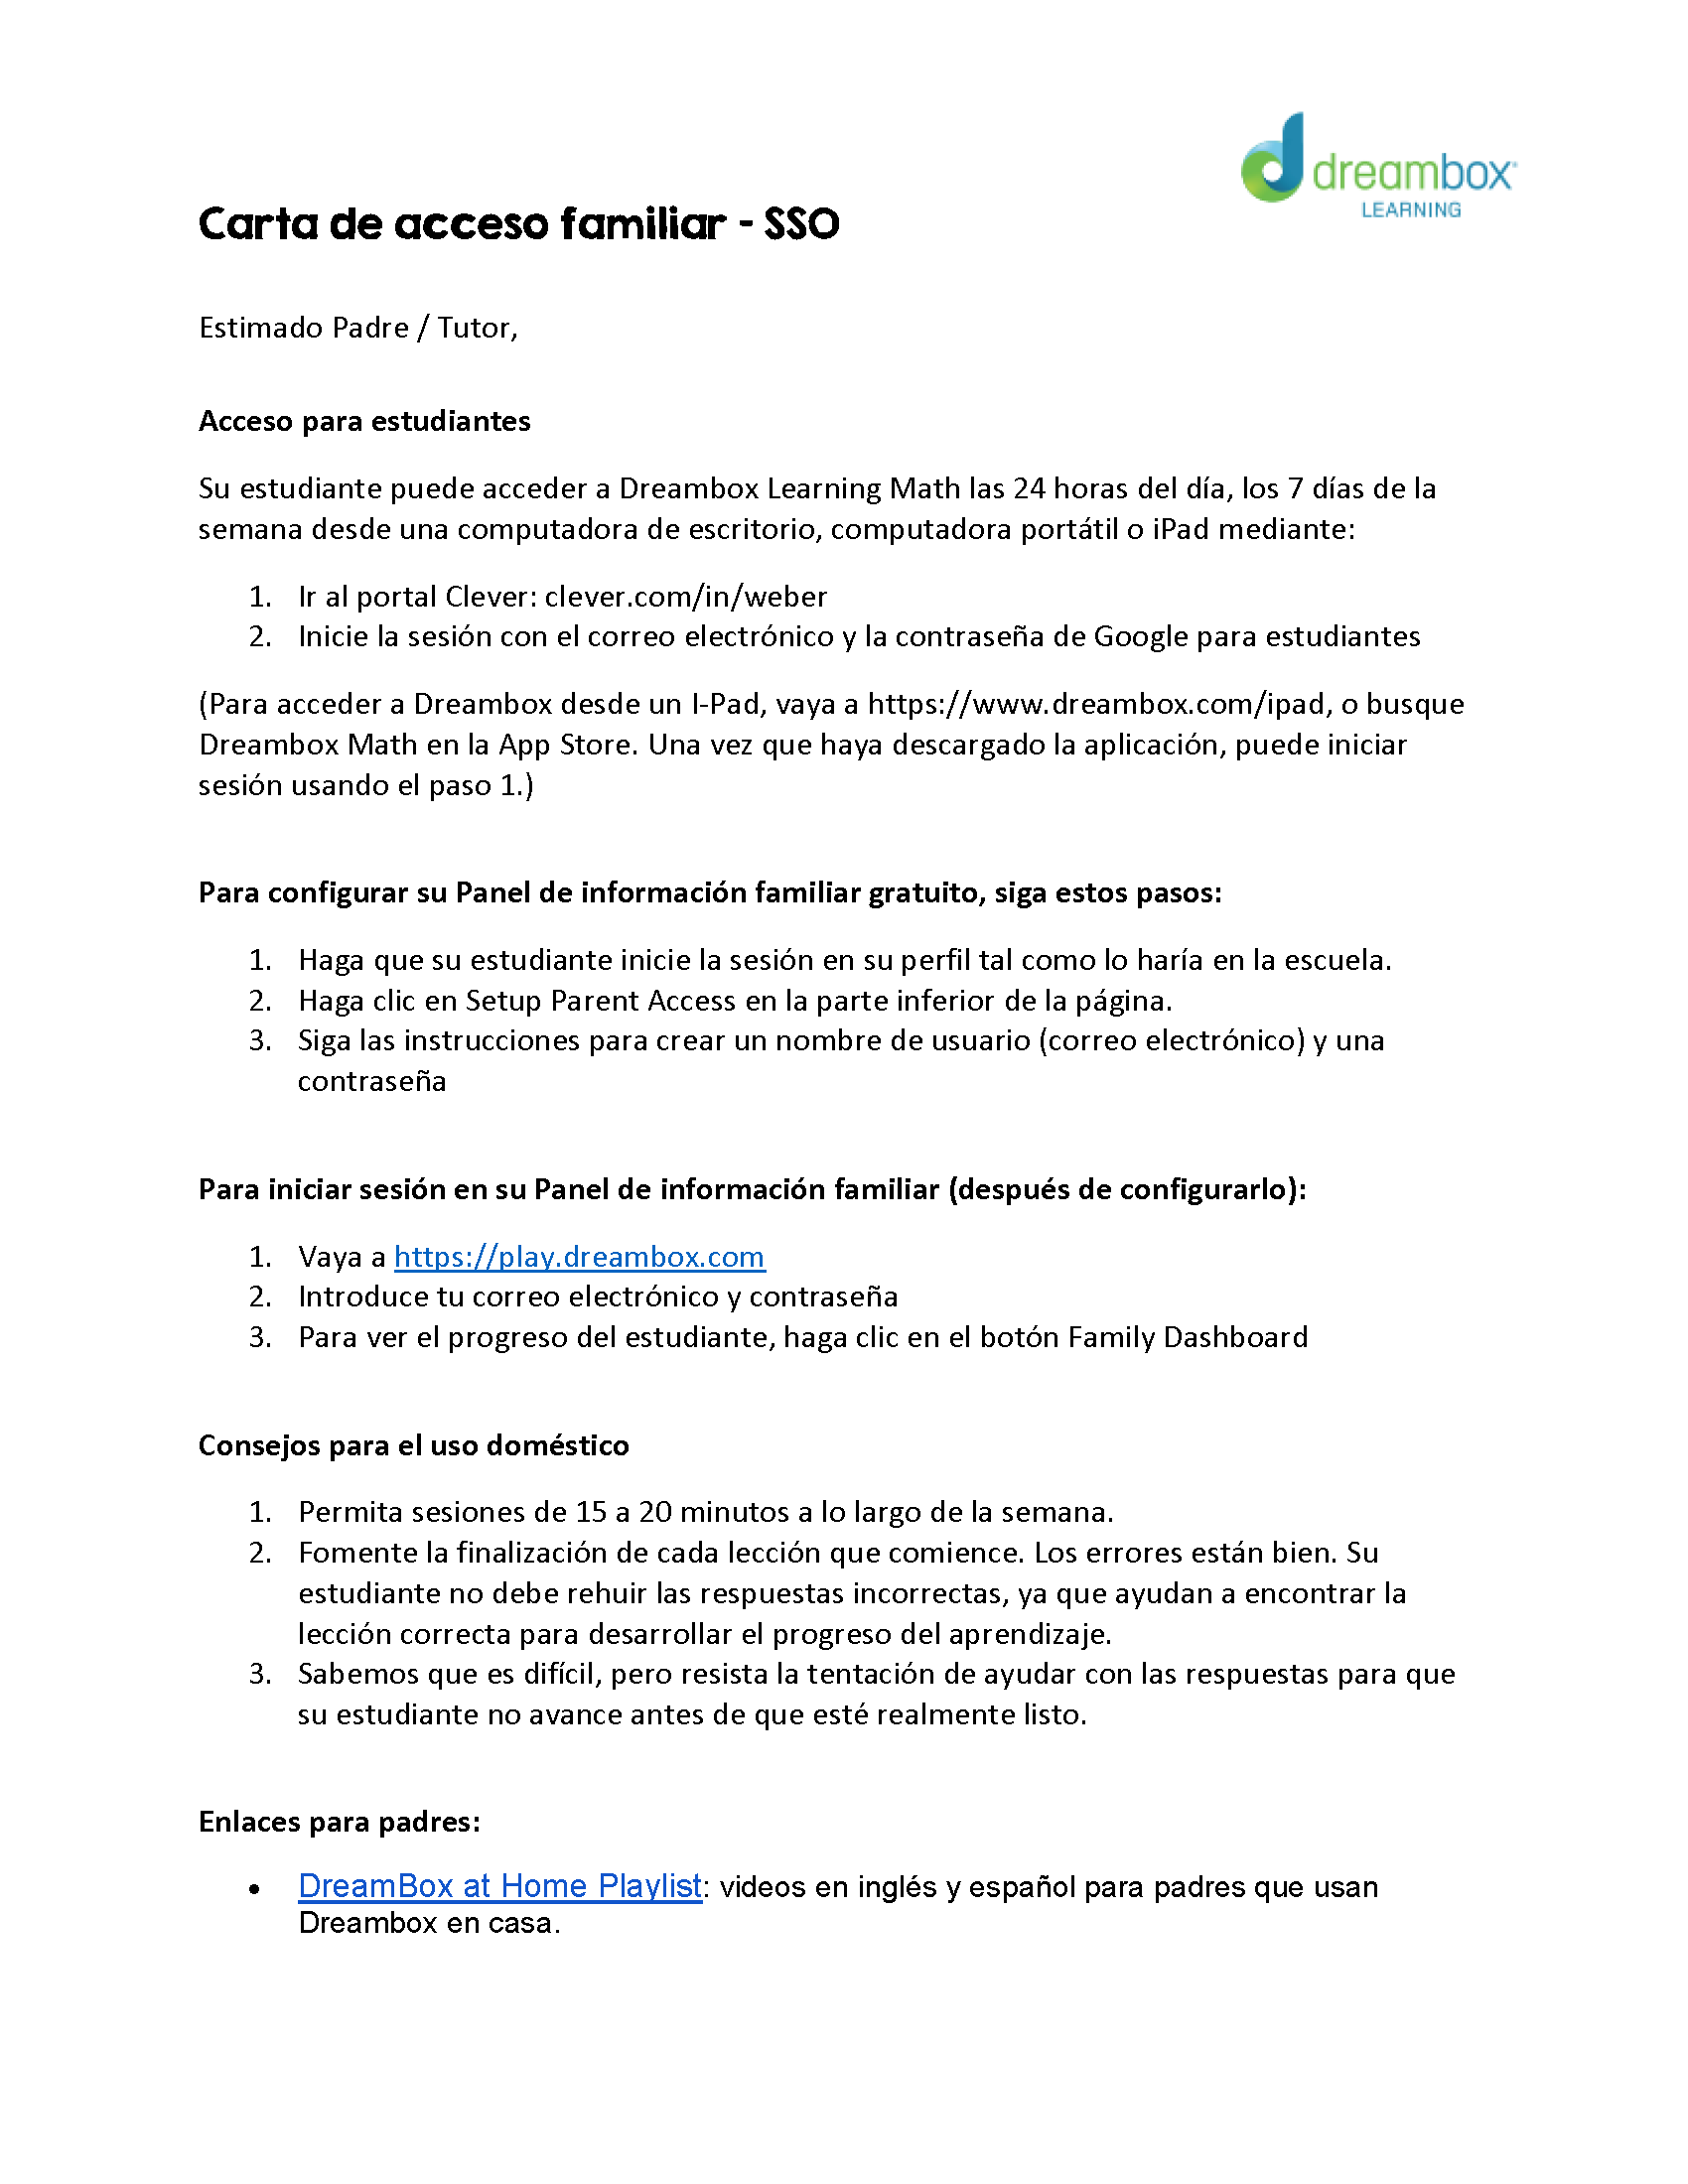 Dreambox Family Access Letter spanish 1